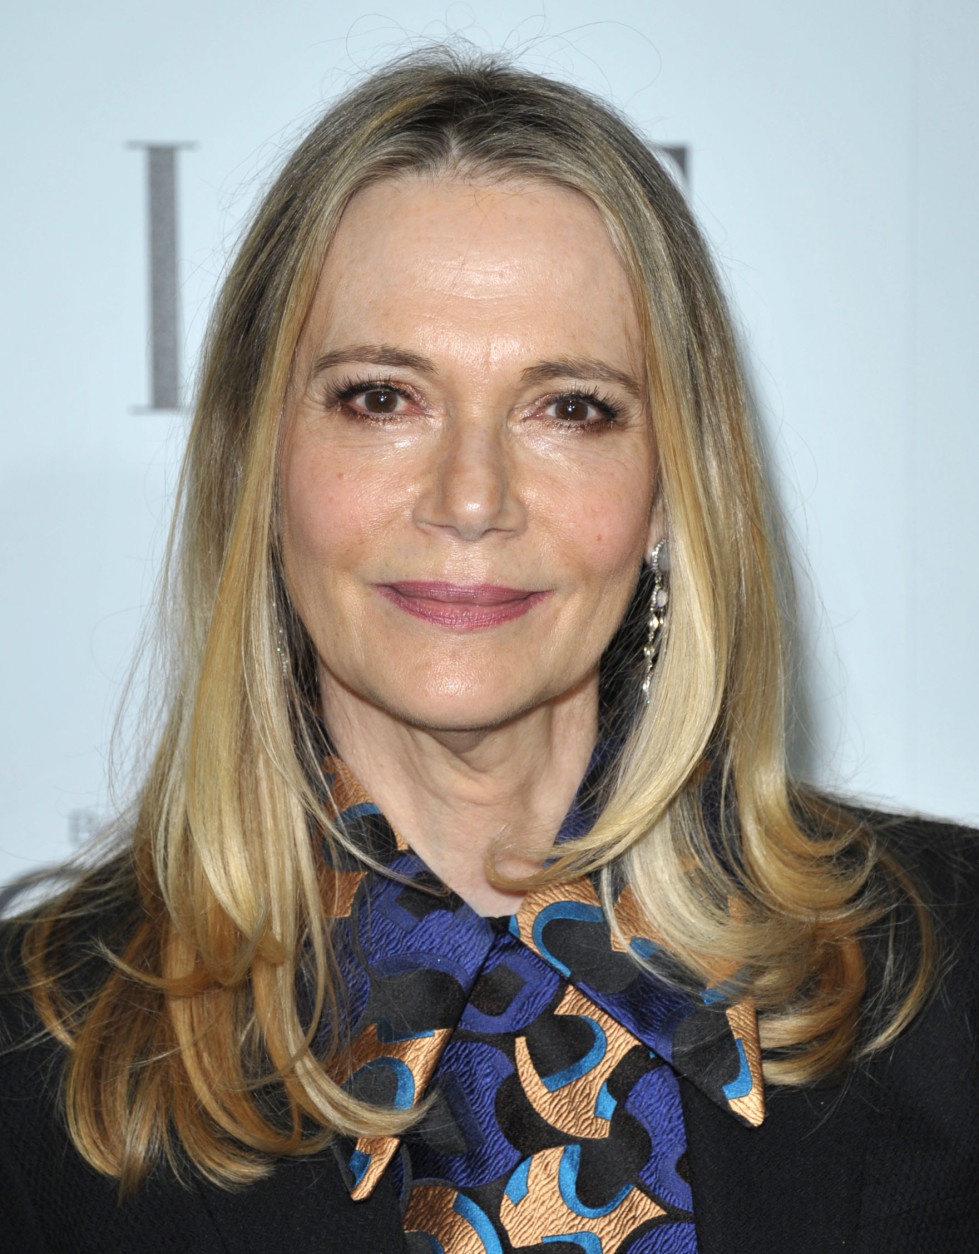 Actress Peggy Lipton is 69 on Aug. 30. Here, Lipton attends the 19th Annual ELLE Women In Hollywood Celebration in Los Angels on Monday Oct. 15, 2012.  (Photo by John Shearer/Invision/AP)